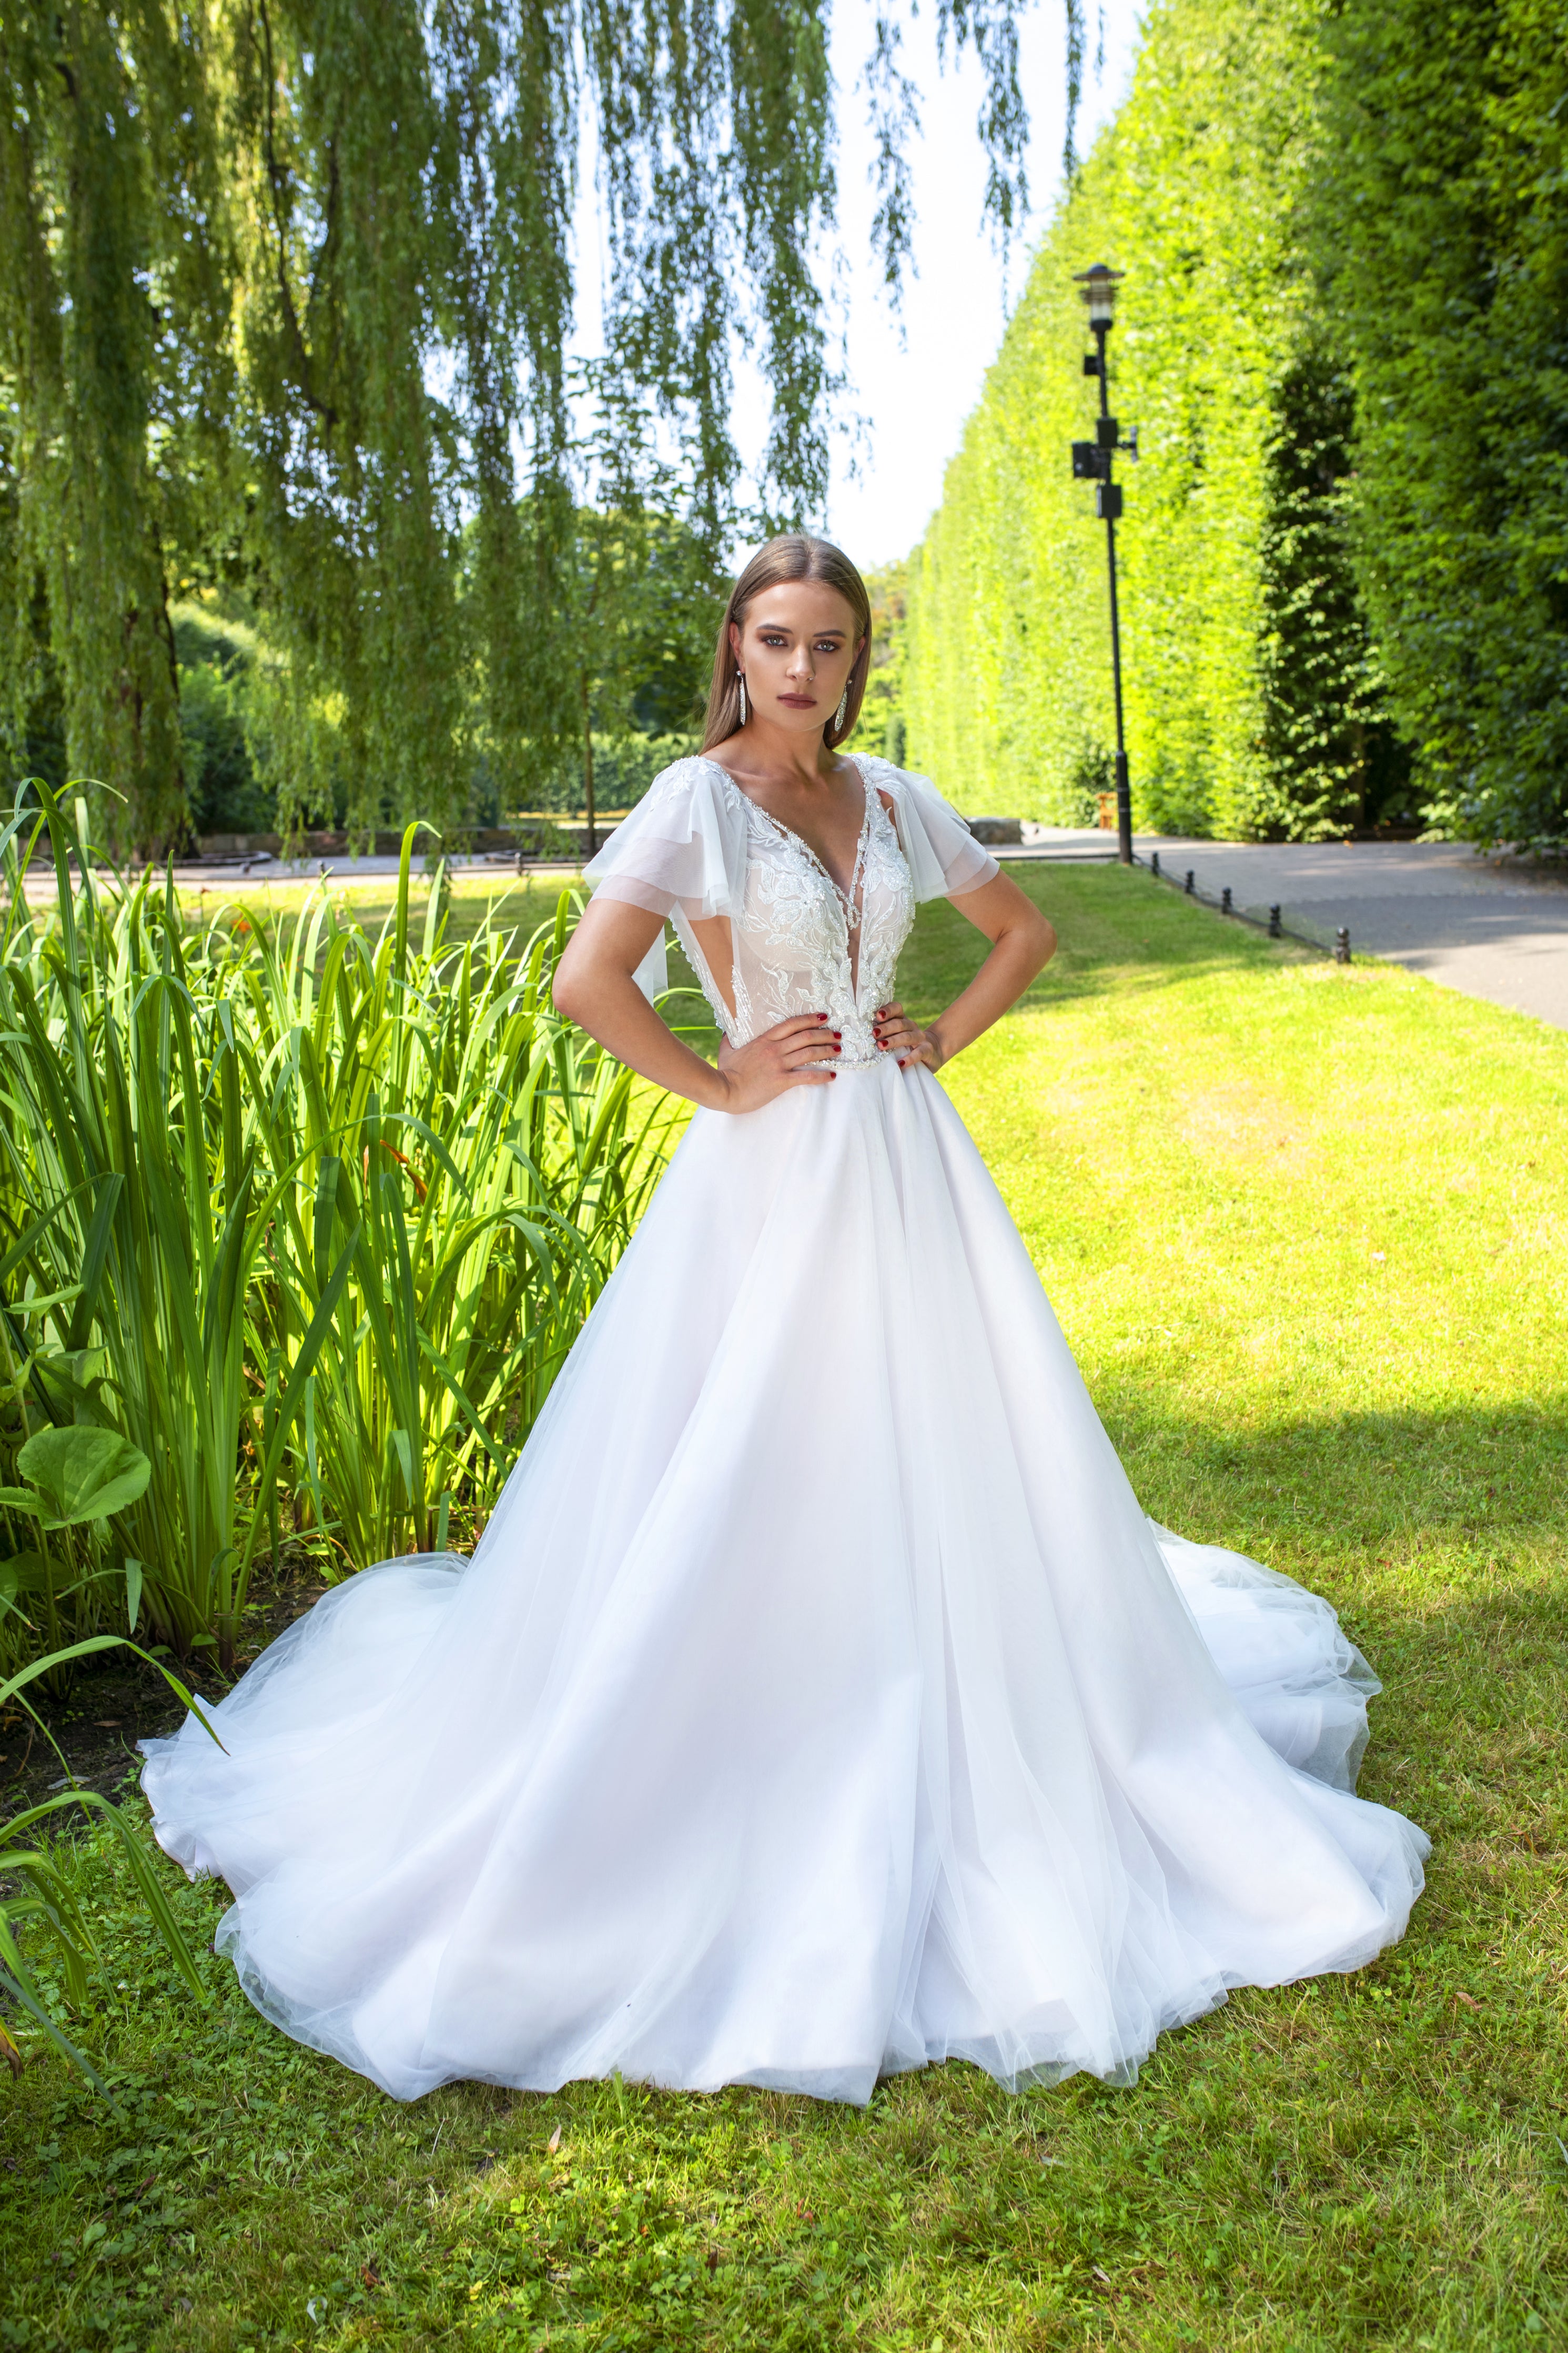 Geneve - Plunging V-Neck Ball Gown with Ruffled Sleeves - Maxima Bridal